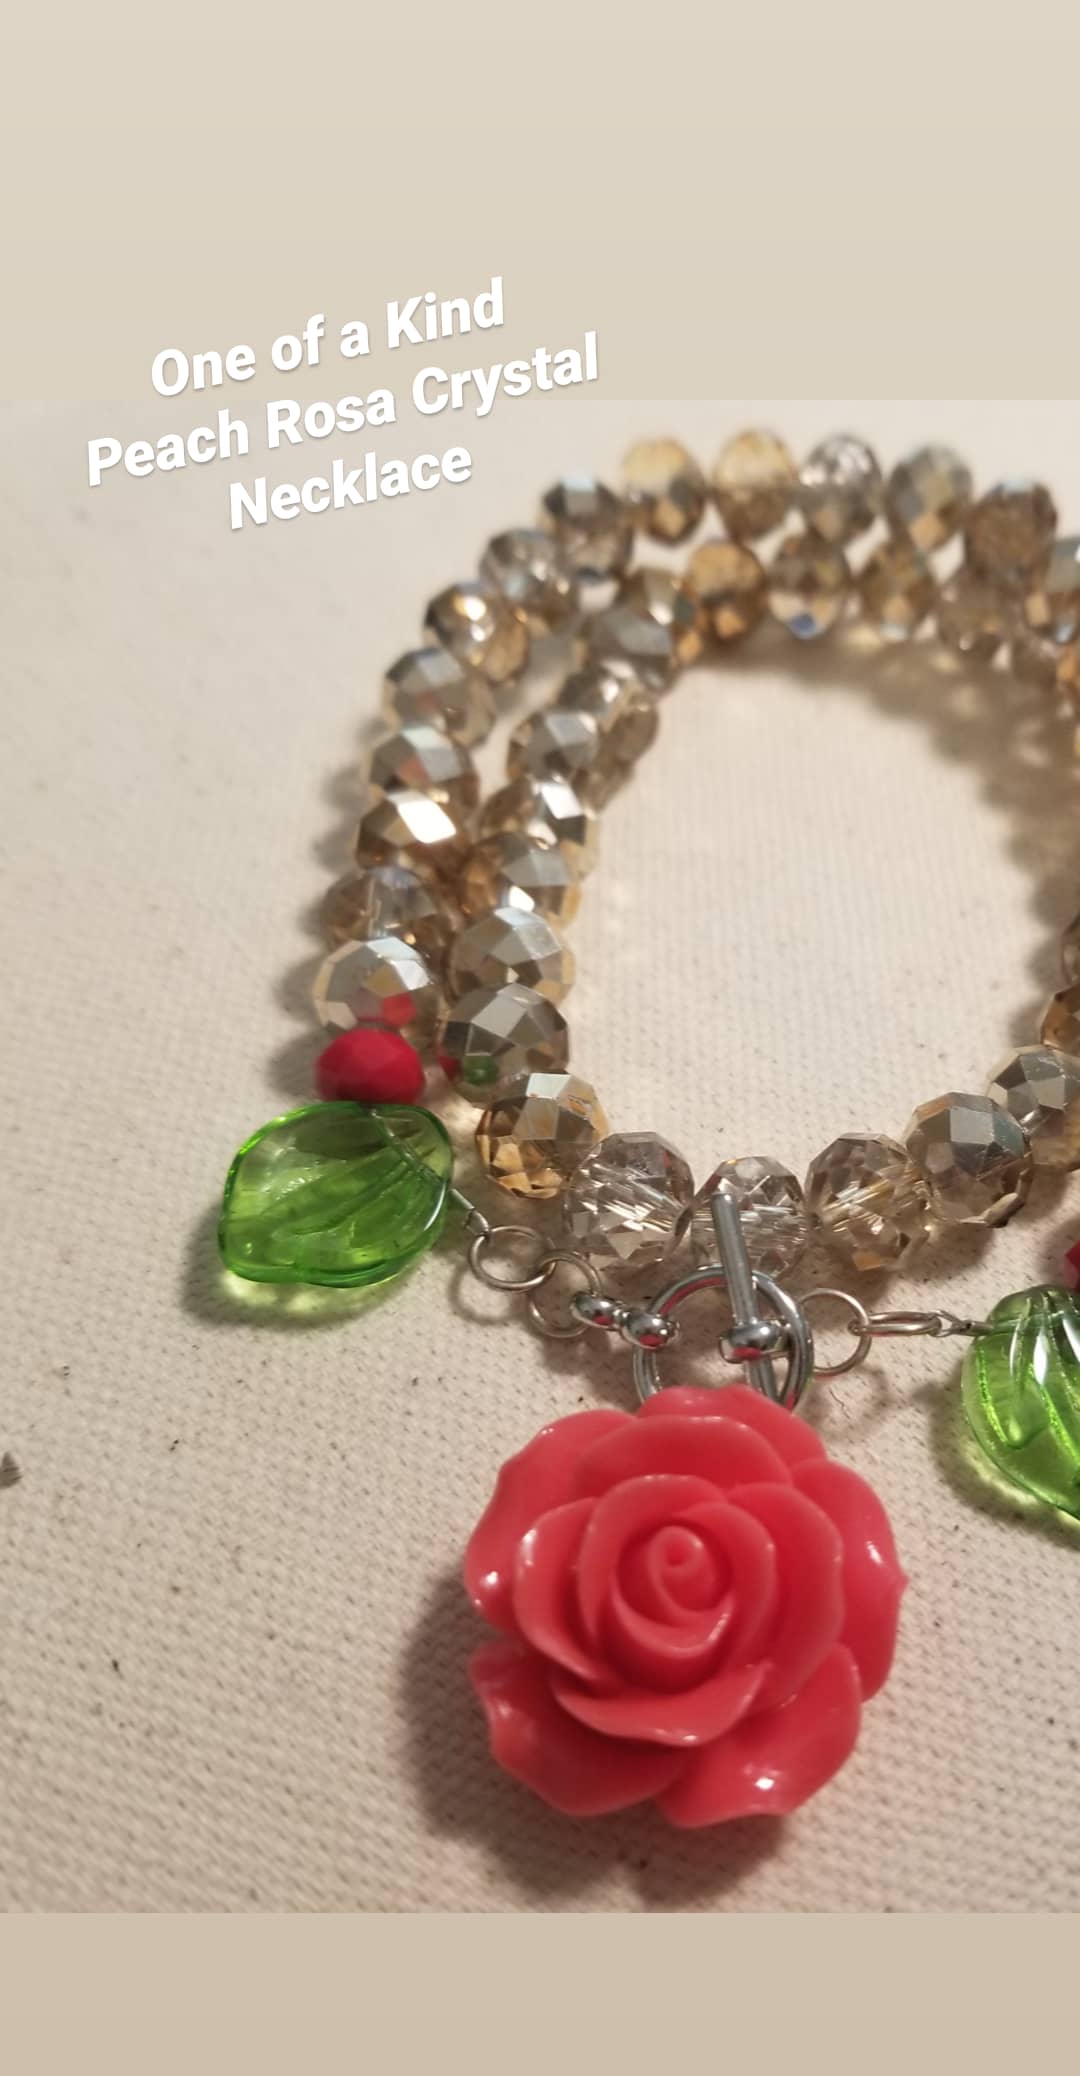 Peach Rose Crystal Necklace